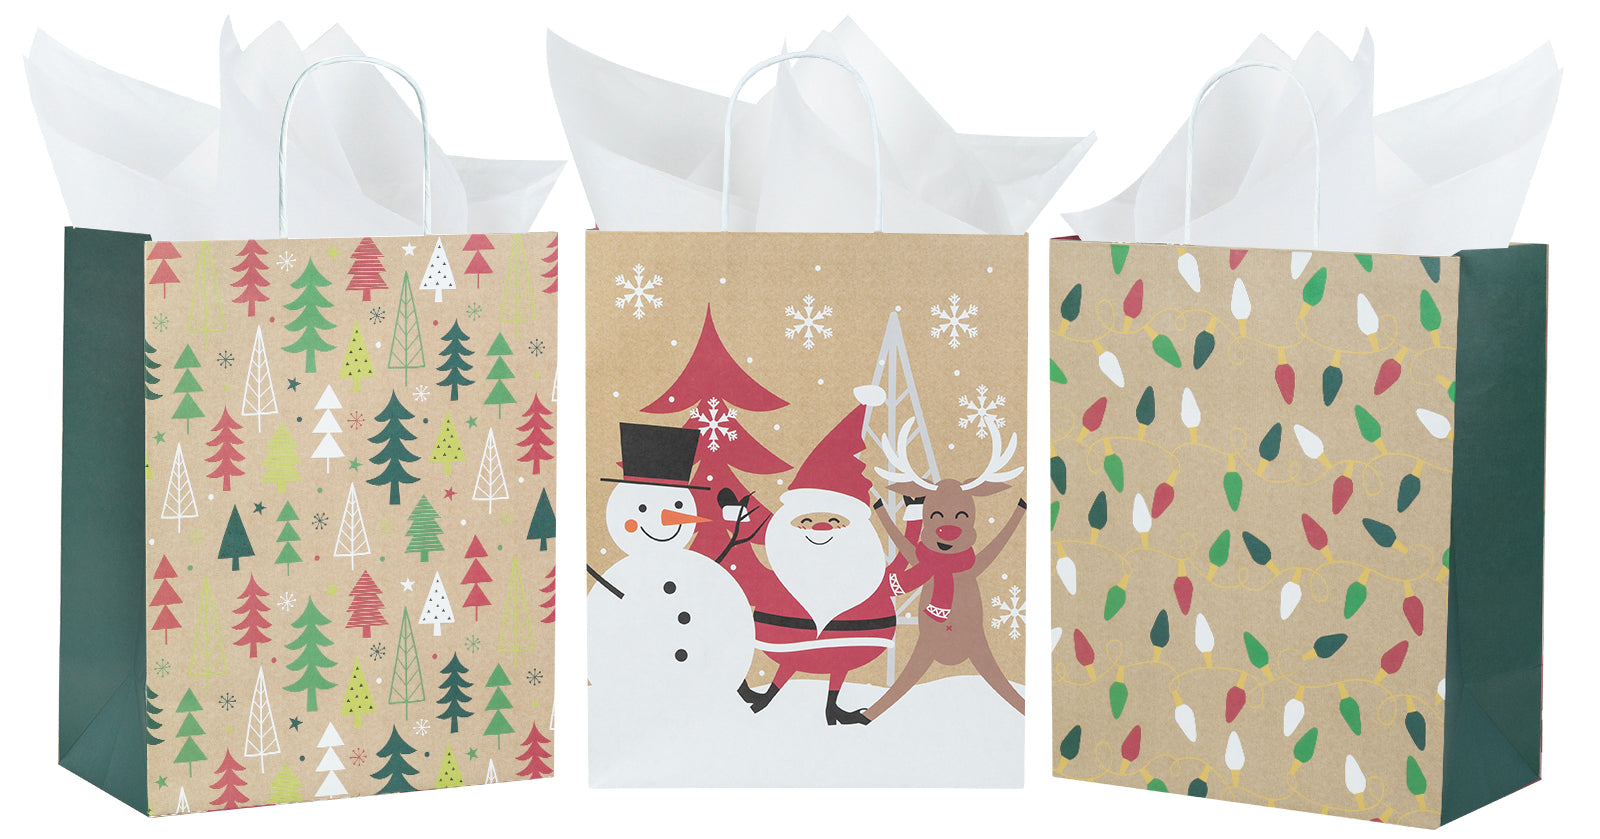 Assort Large Christmas Gift Bags - Santa Claus/ Pine Trees/ Colorful Lights - 9 Pack,10x5x13 inch